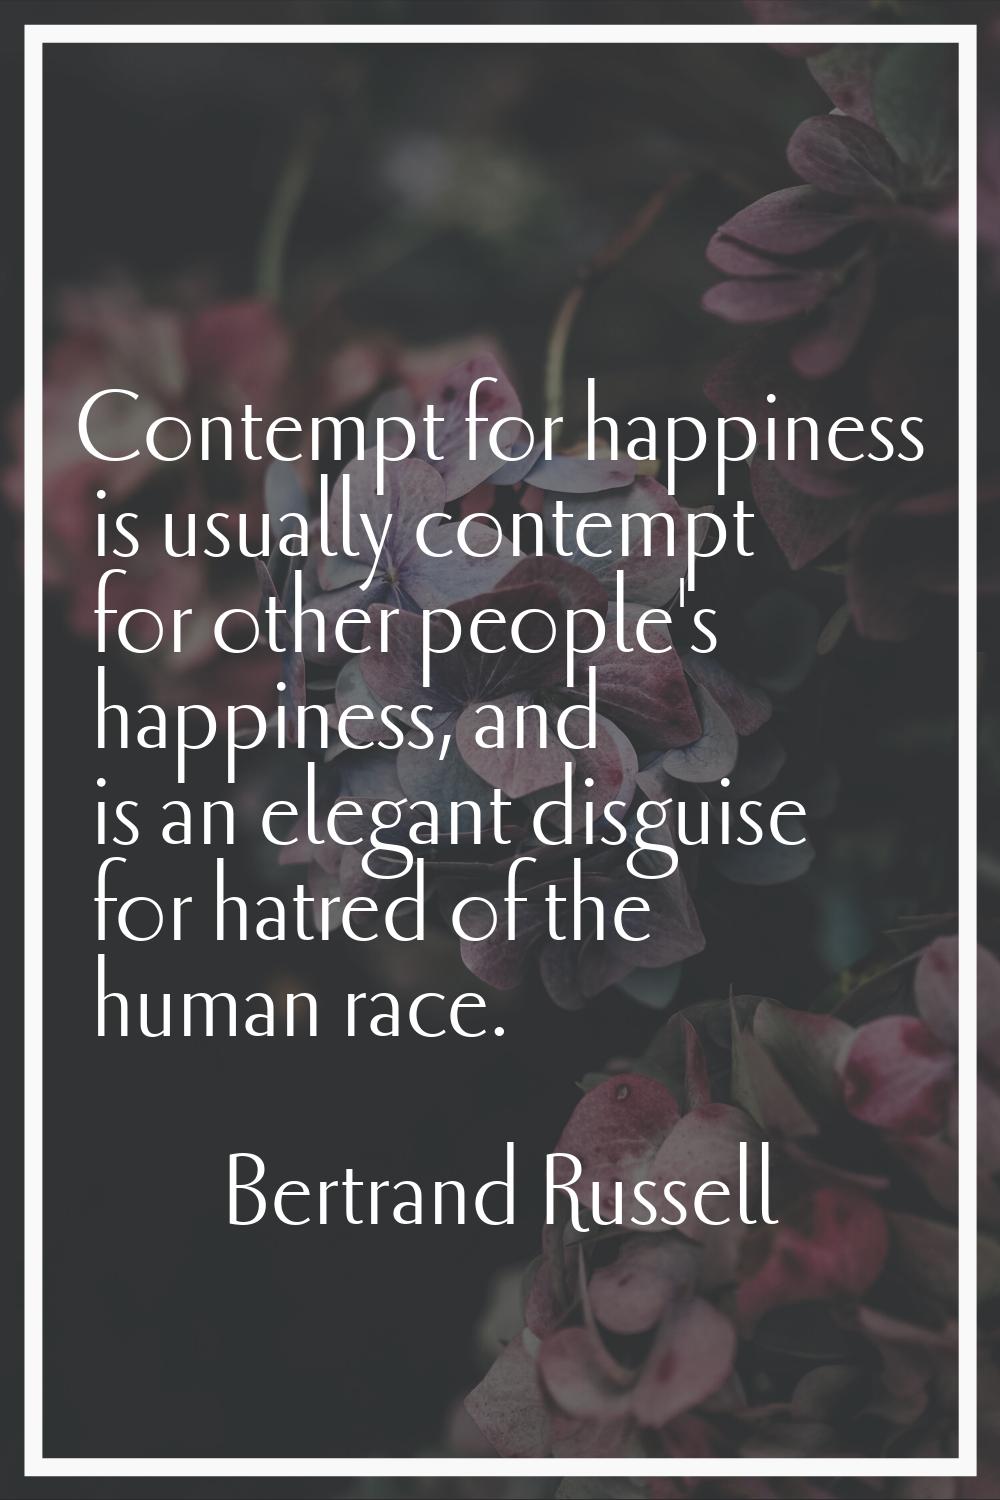 Contempt for happiness is usually contempt for other people's happiness, and is an elegant disguise